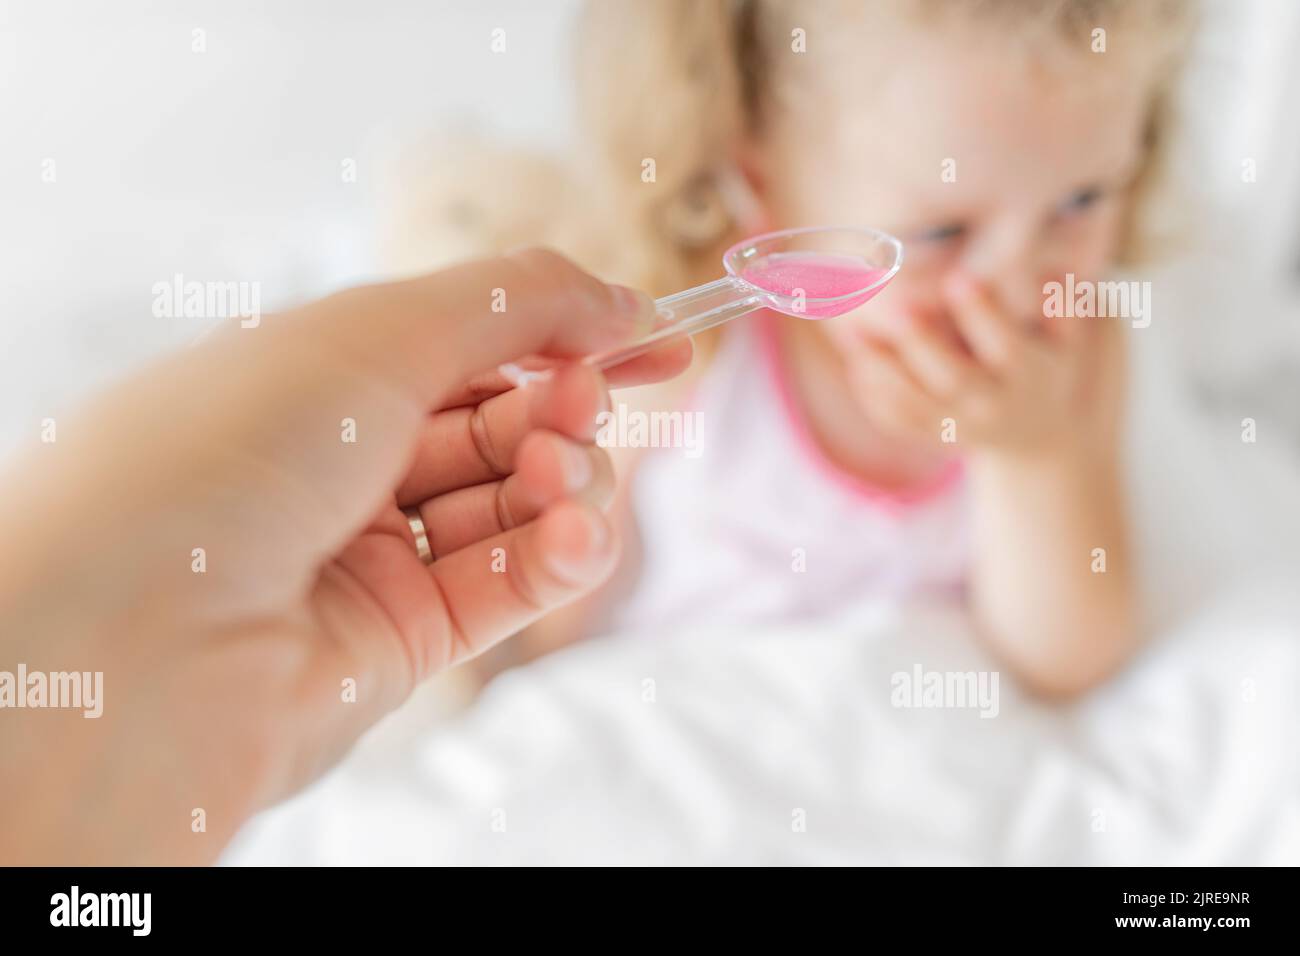 The child refuses to drink syrup. Stock Photo